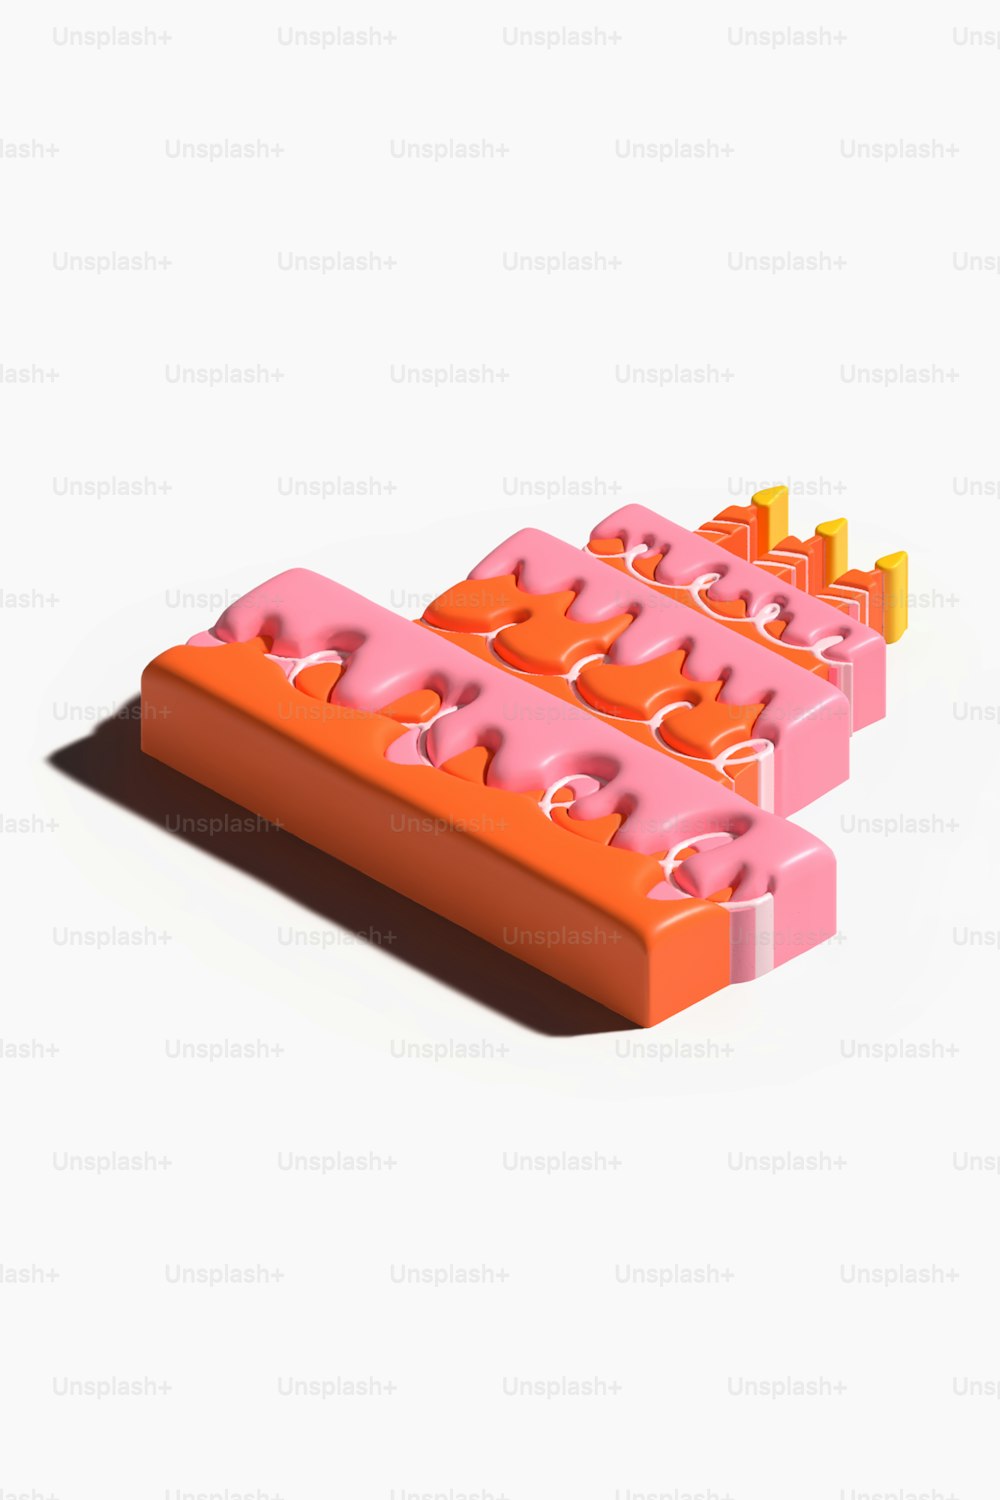 a couple of orange and pink legos sitting on top of each other